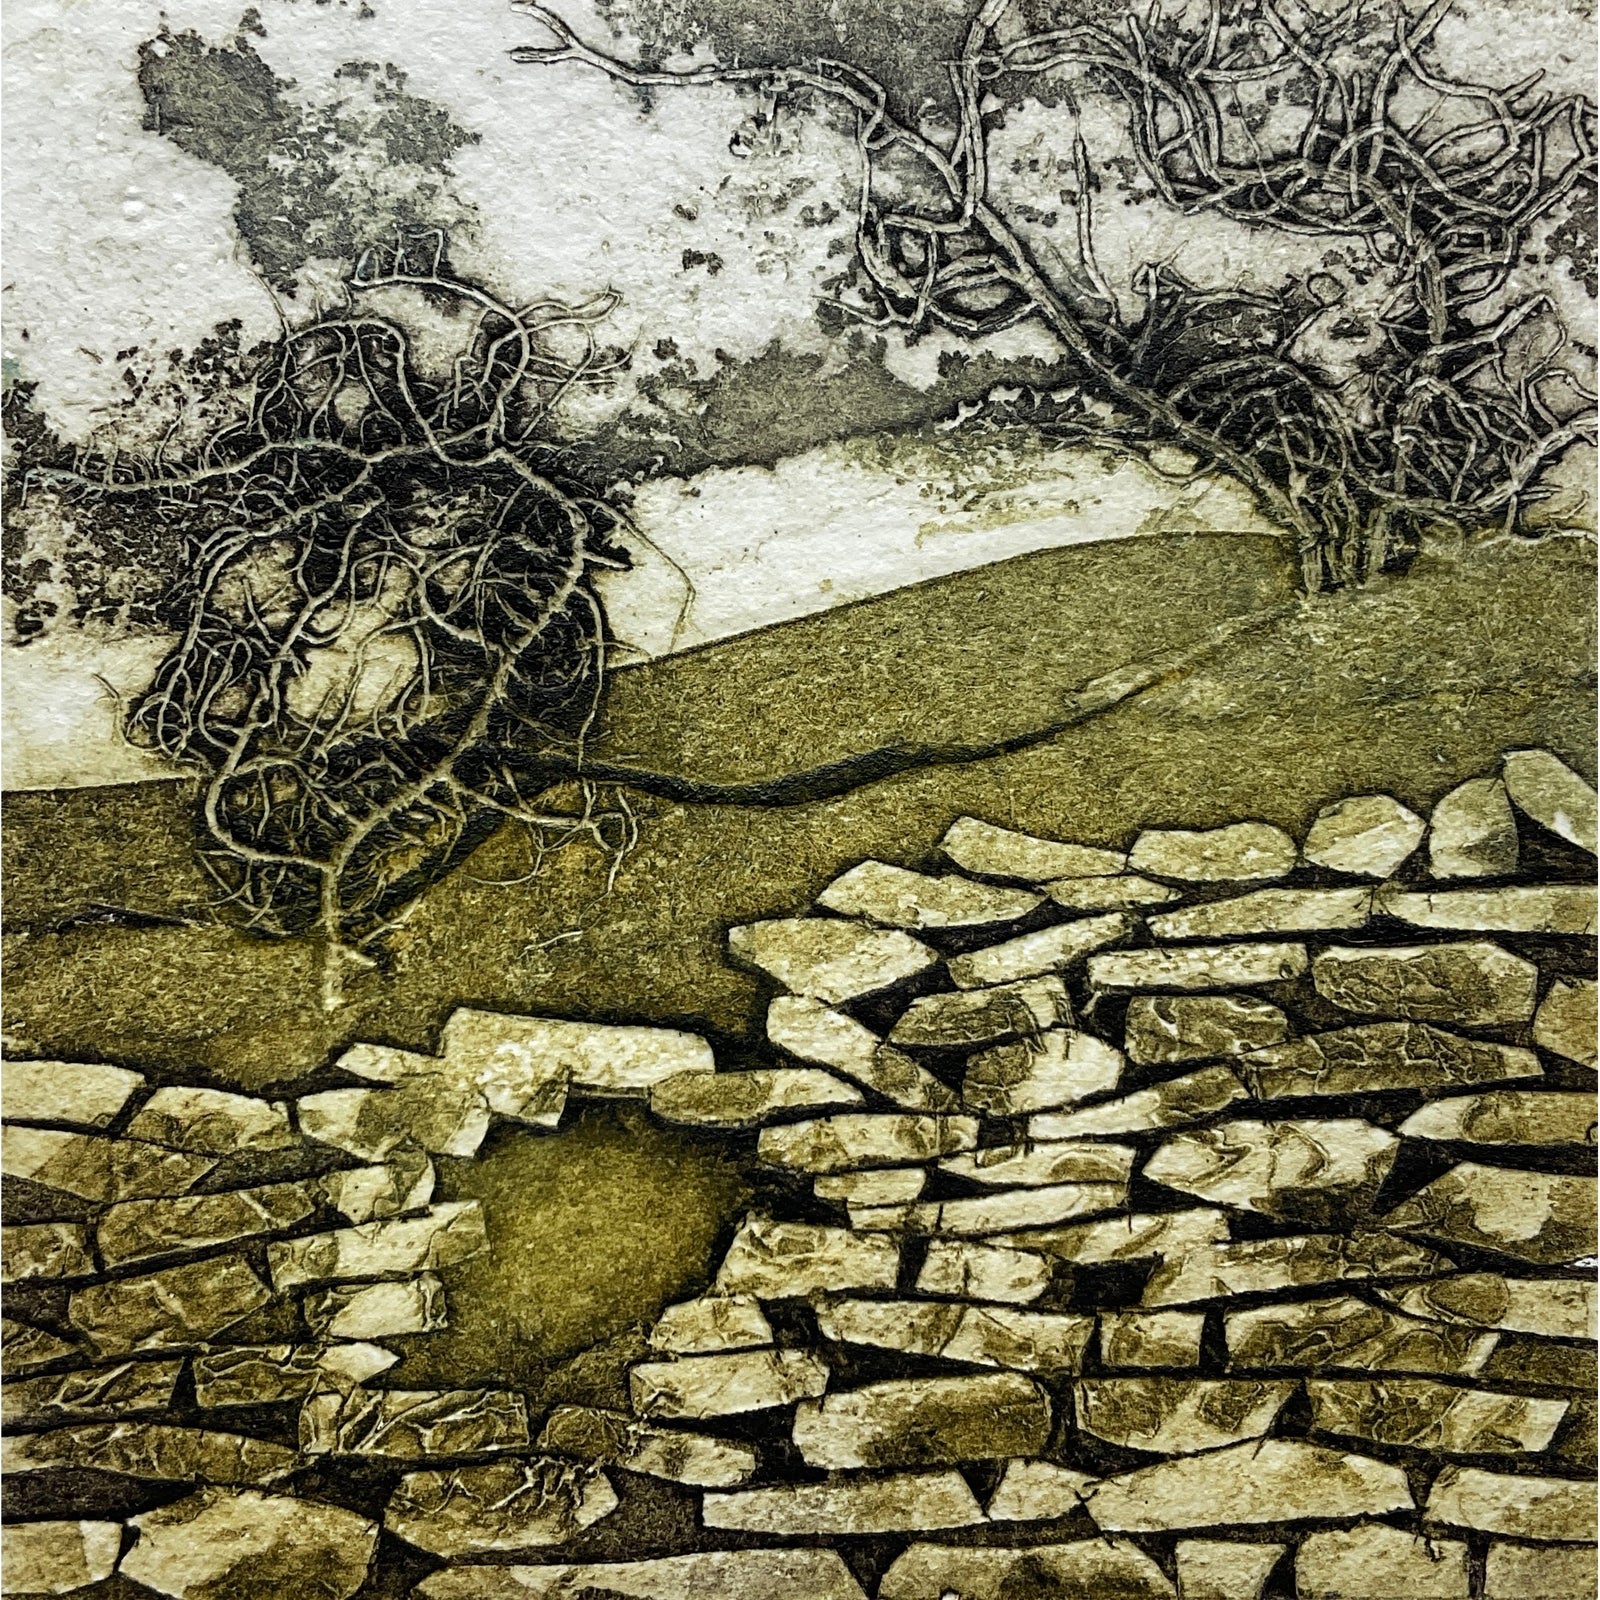 A Way Through, limited edition collagraph  by Sarah Ross-Thompson available at Padstow Gallery, Cornwall